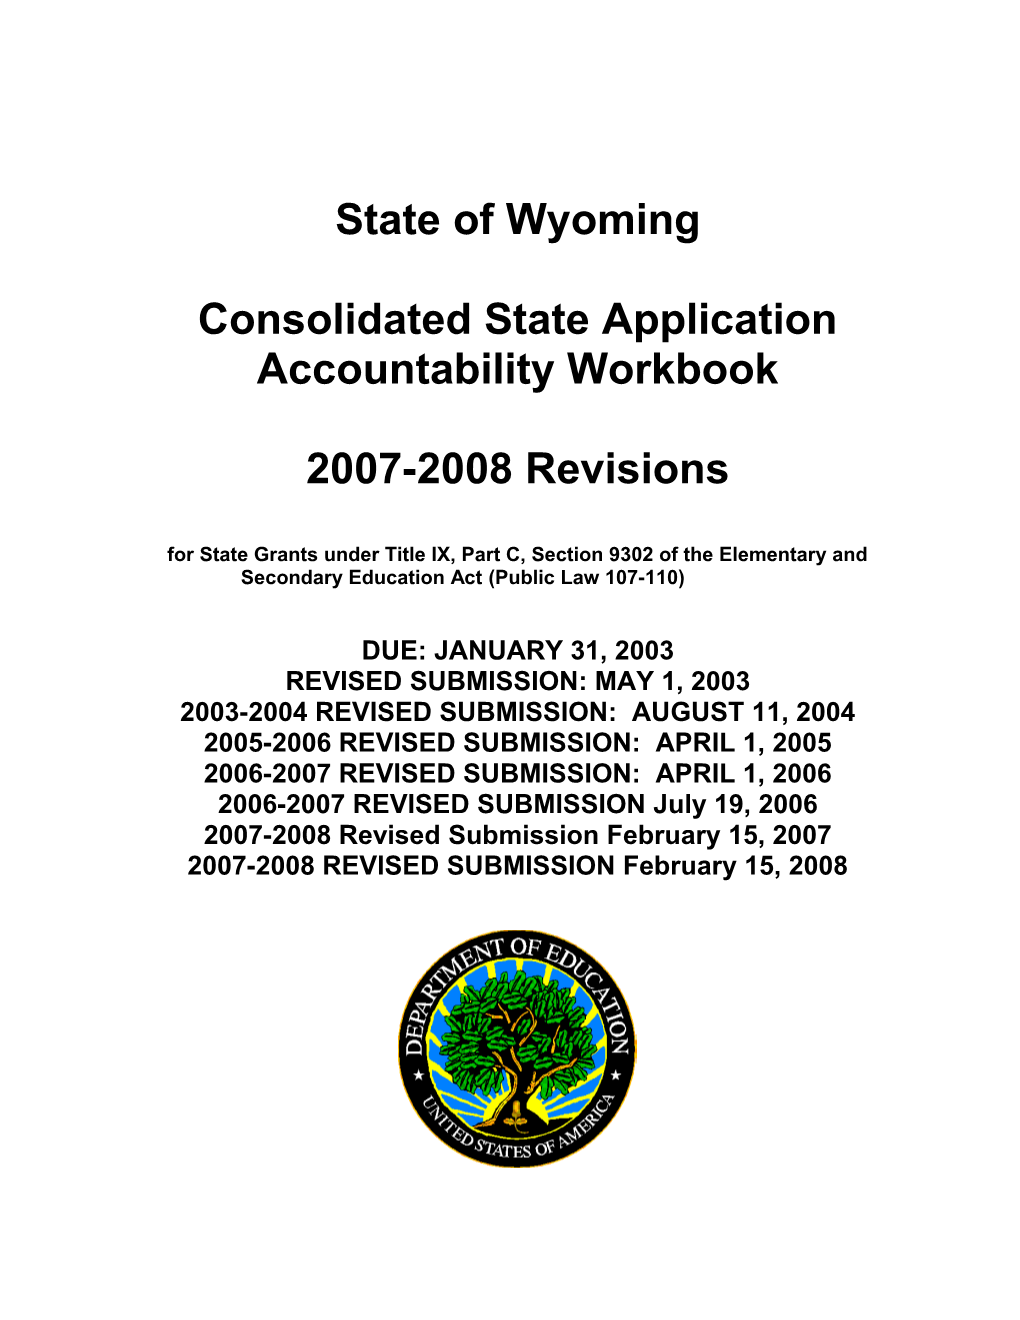 Wyoming Consolidated State Application Accountability Workbook (MS WORD)